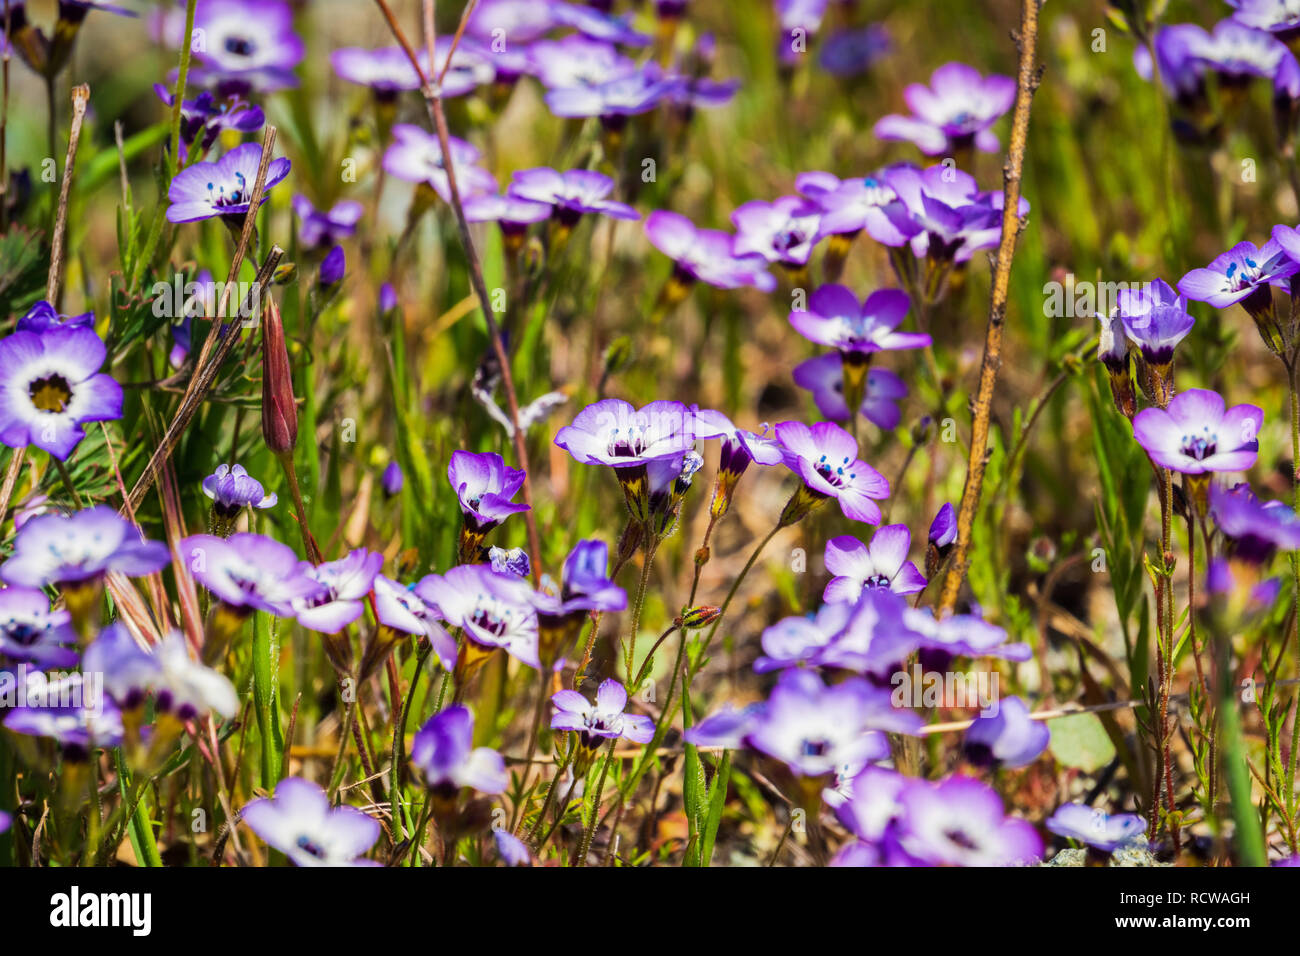 Gilia wildflowers blooming on a meadow, Henry W. Coe State Park, California Stock Photo